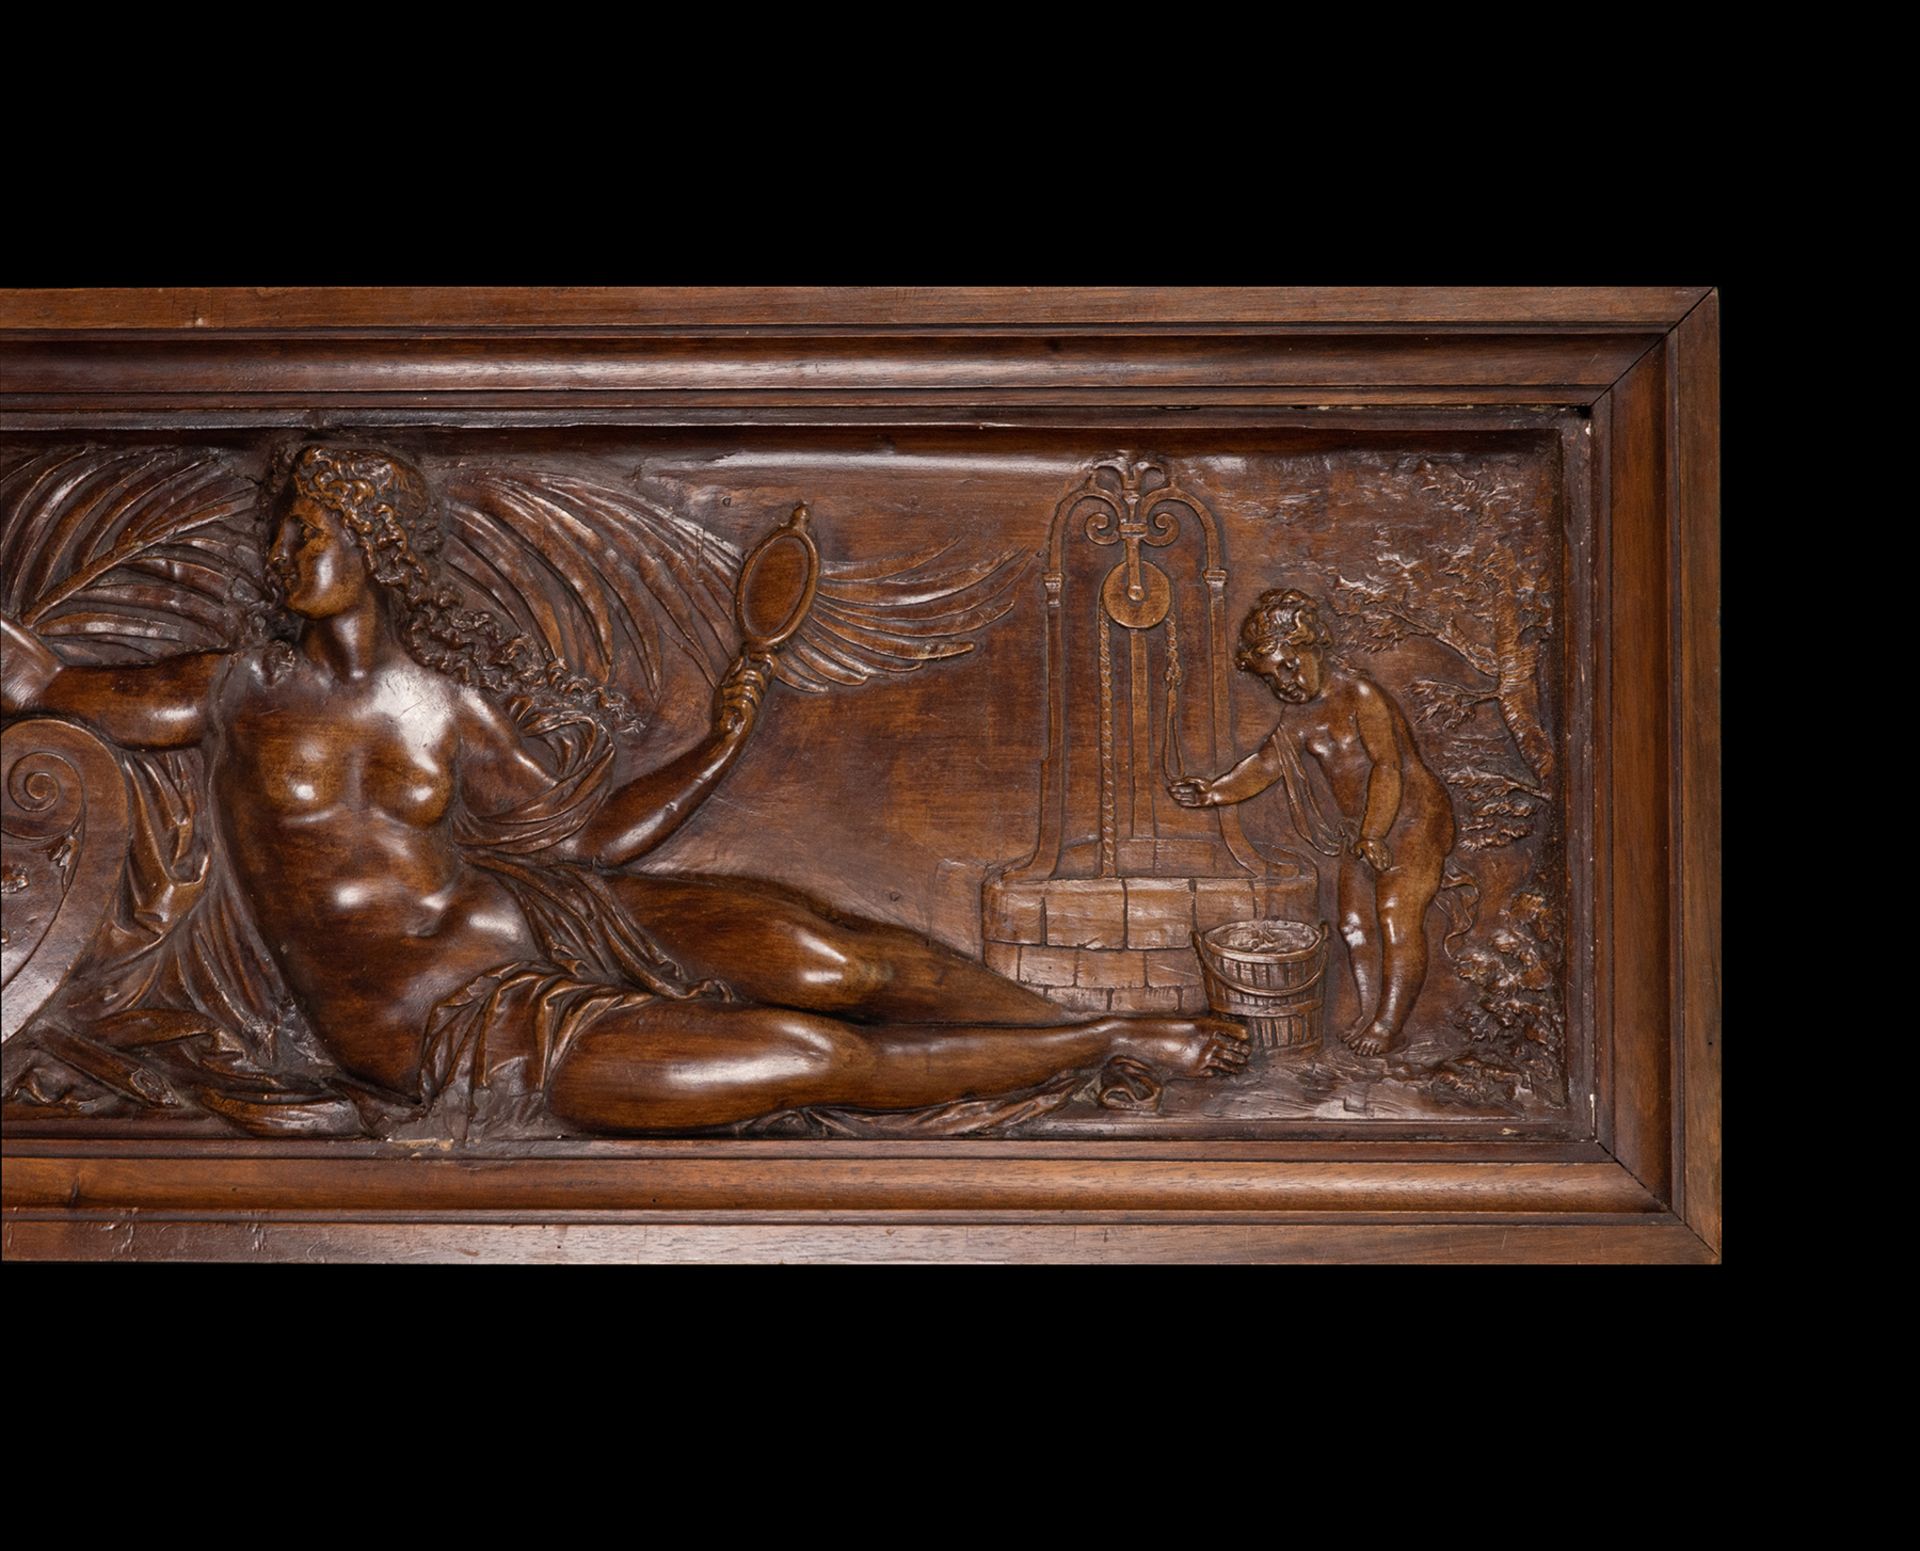 Crowned Venus next to Goddess Mars, palace relief in carved wood from the 17th century, French Renai - Image 2 of 4